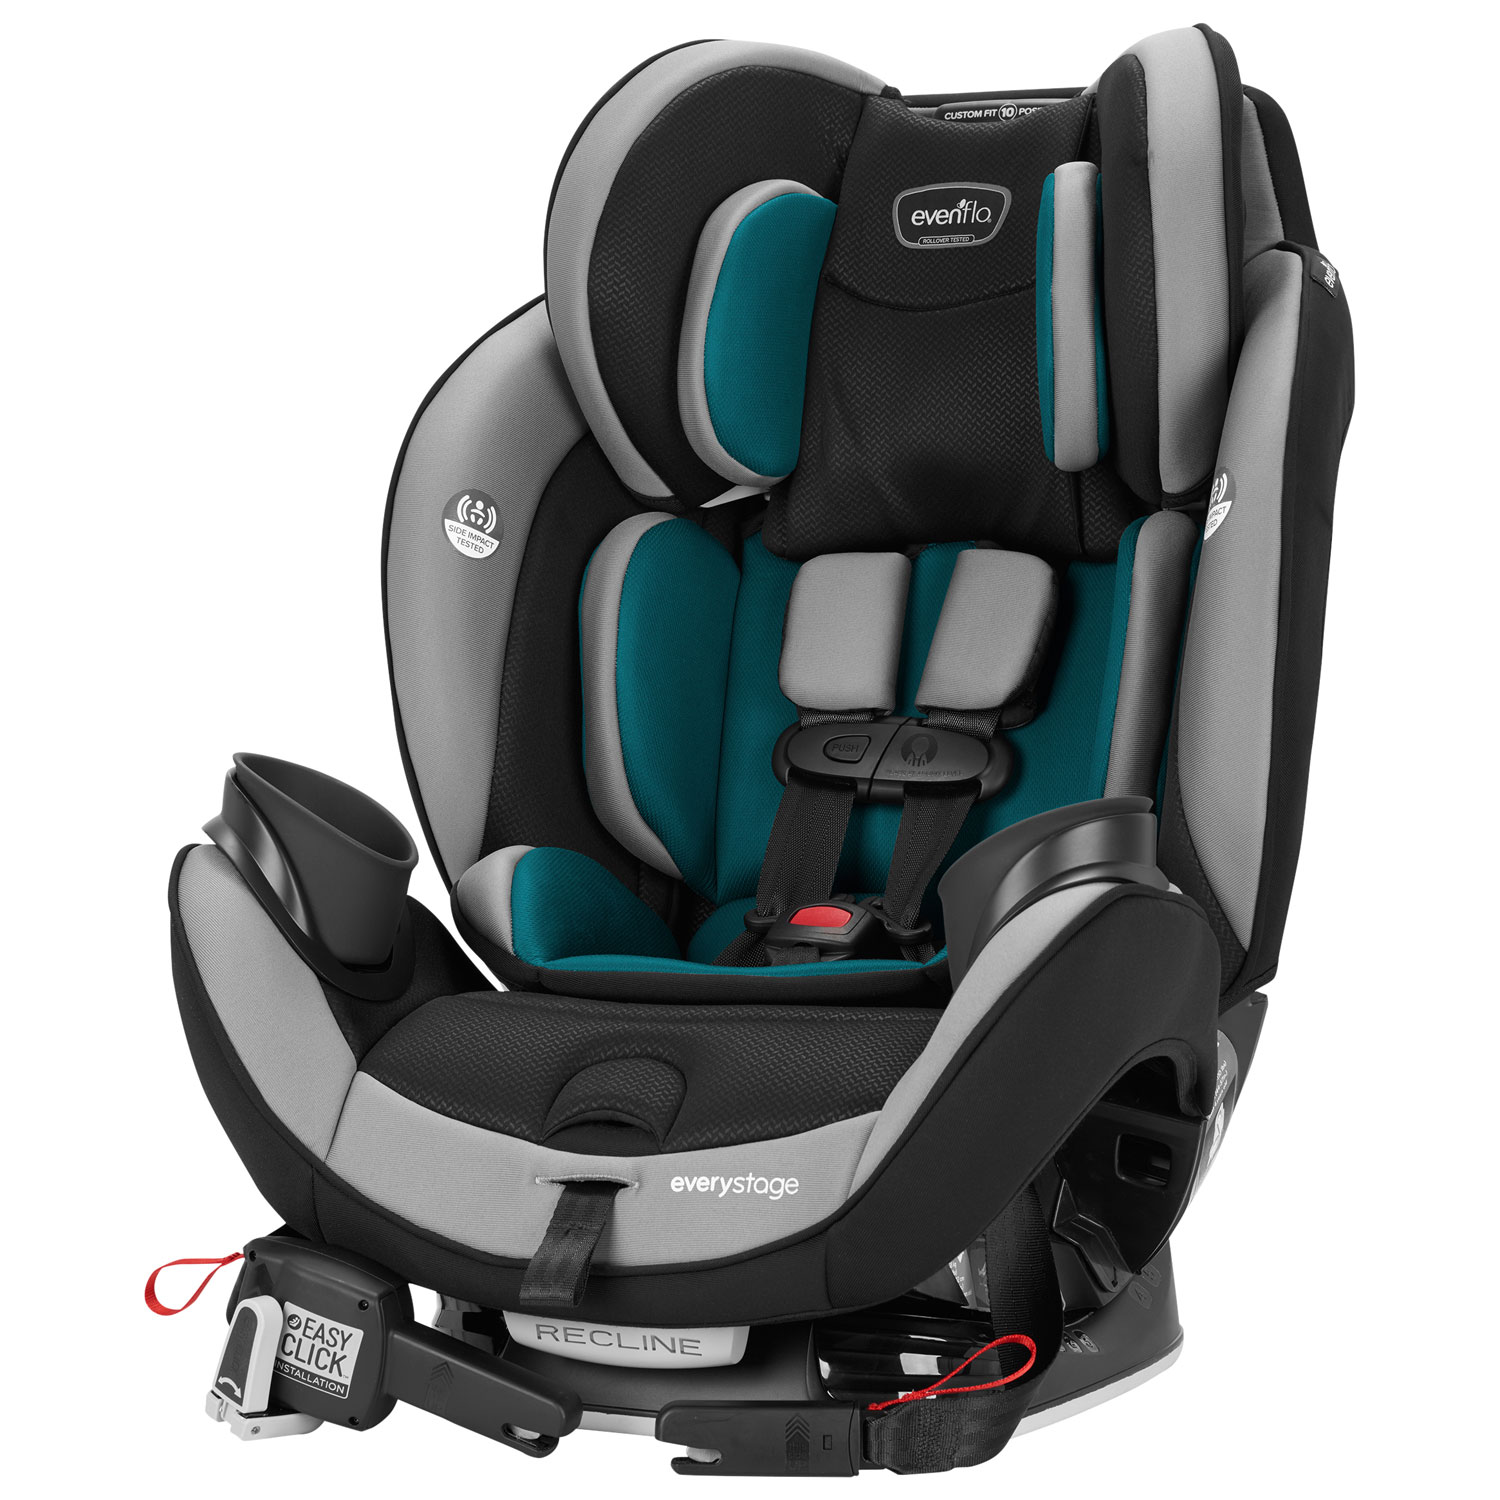 Evenflo EveryStage Deluxe Convertible 3-in-1 Car Seat - Reef